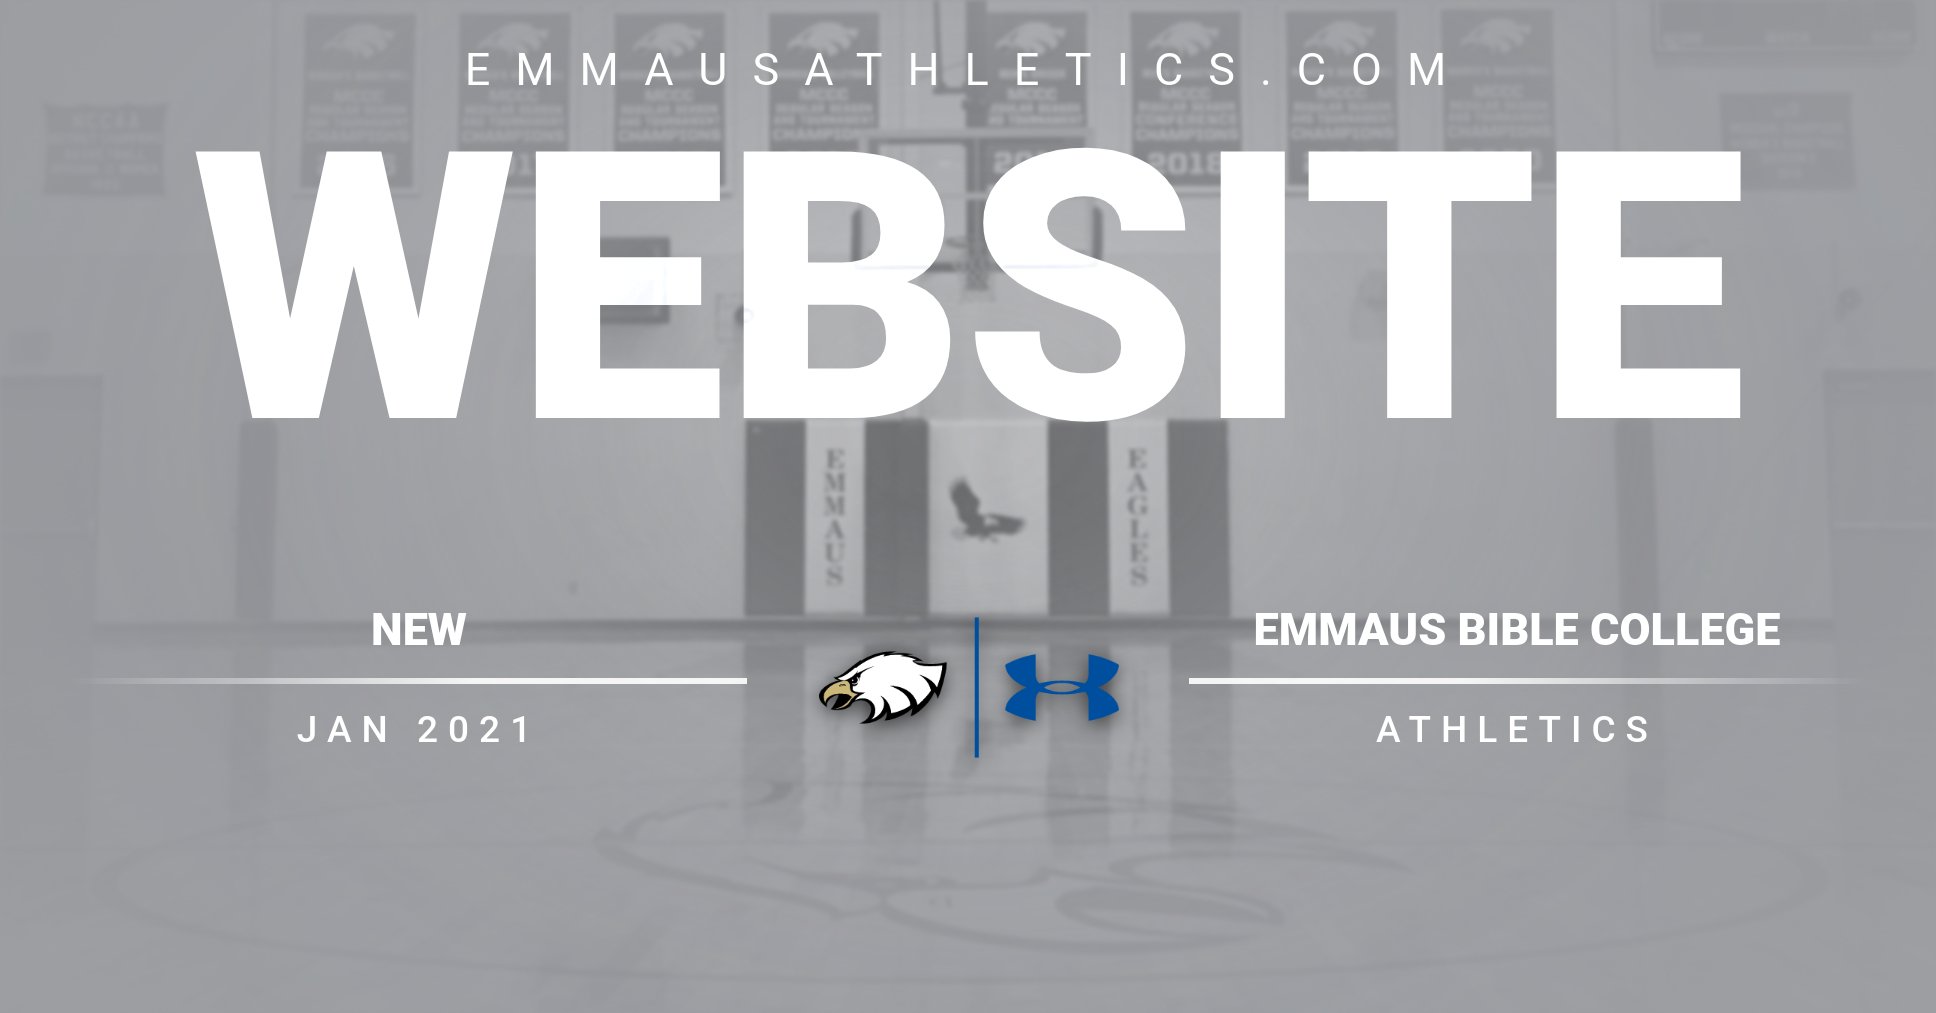 New Year, New Site: EmmausAthletics.com Relaunches